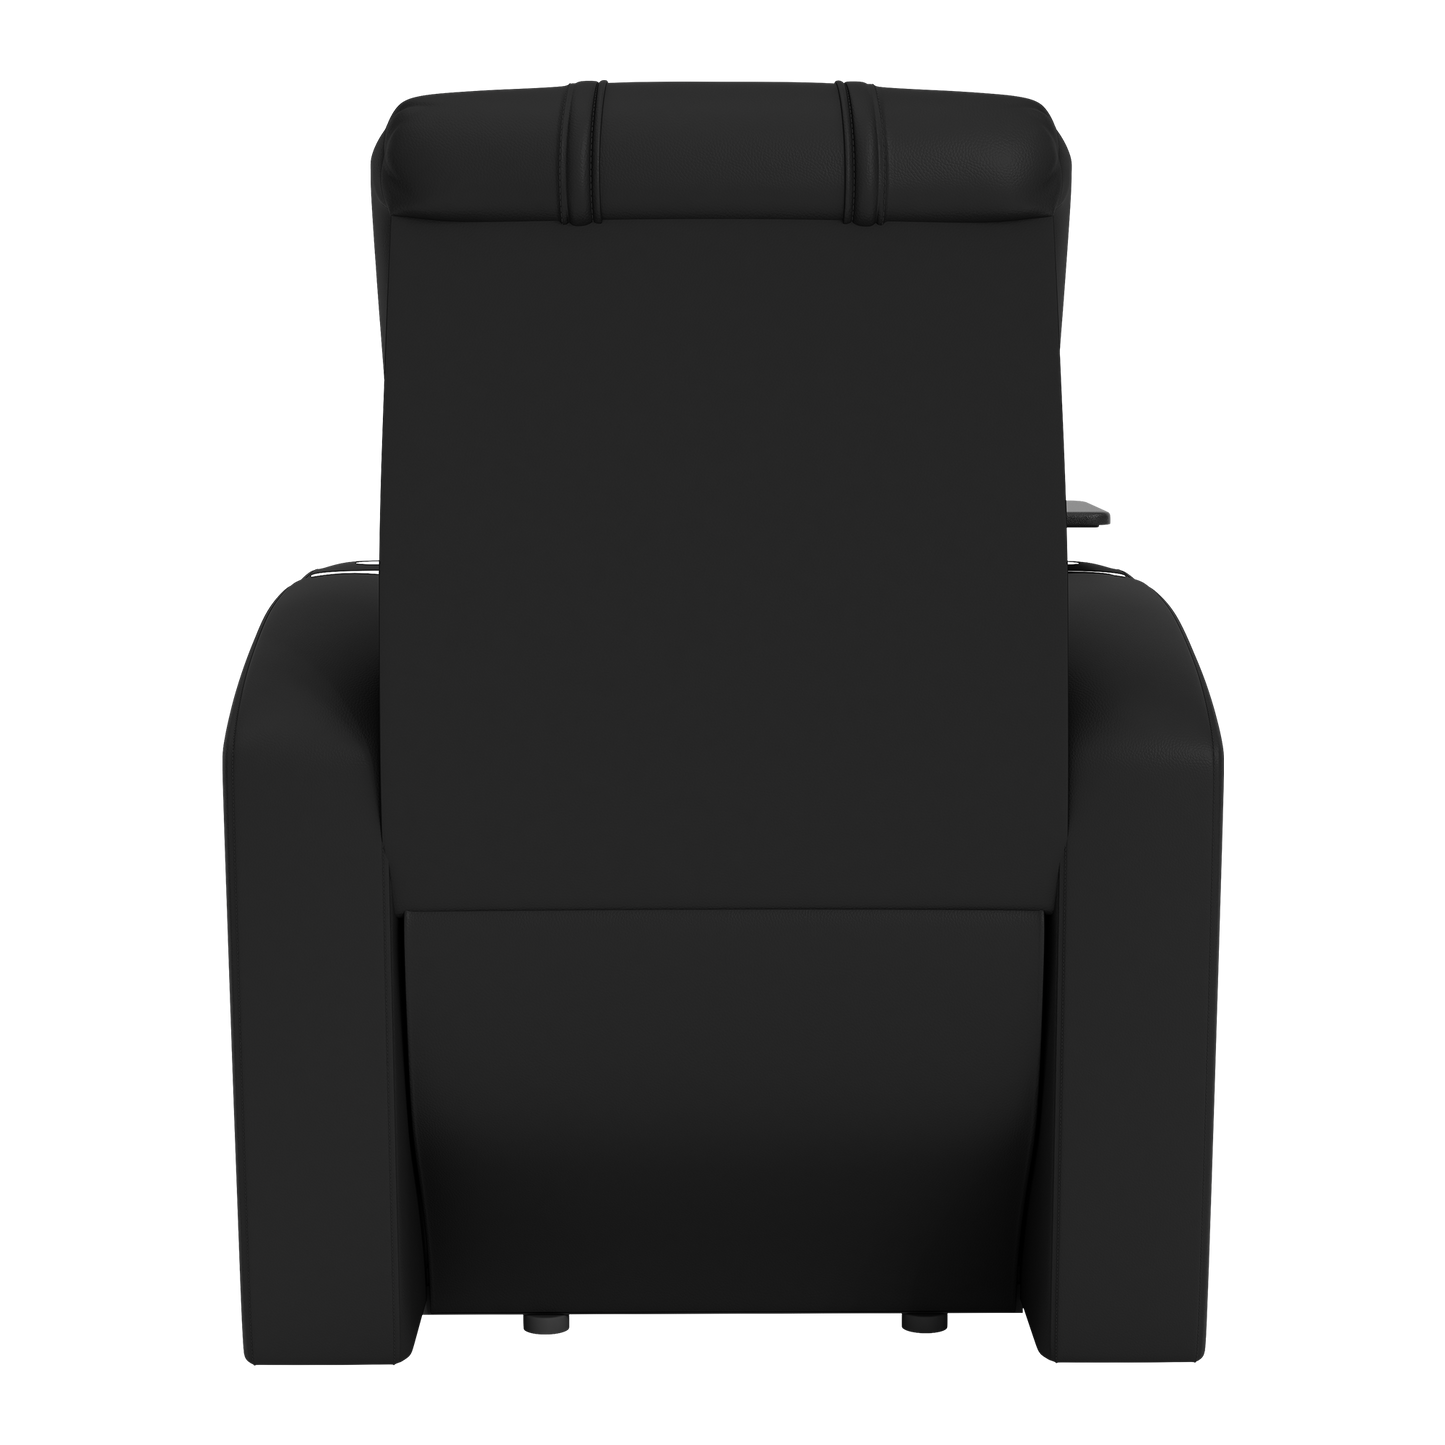 Stealth Power Plus Recliner with Isles Gaming Team Logo